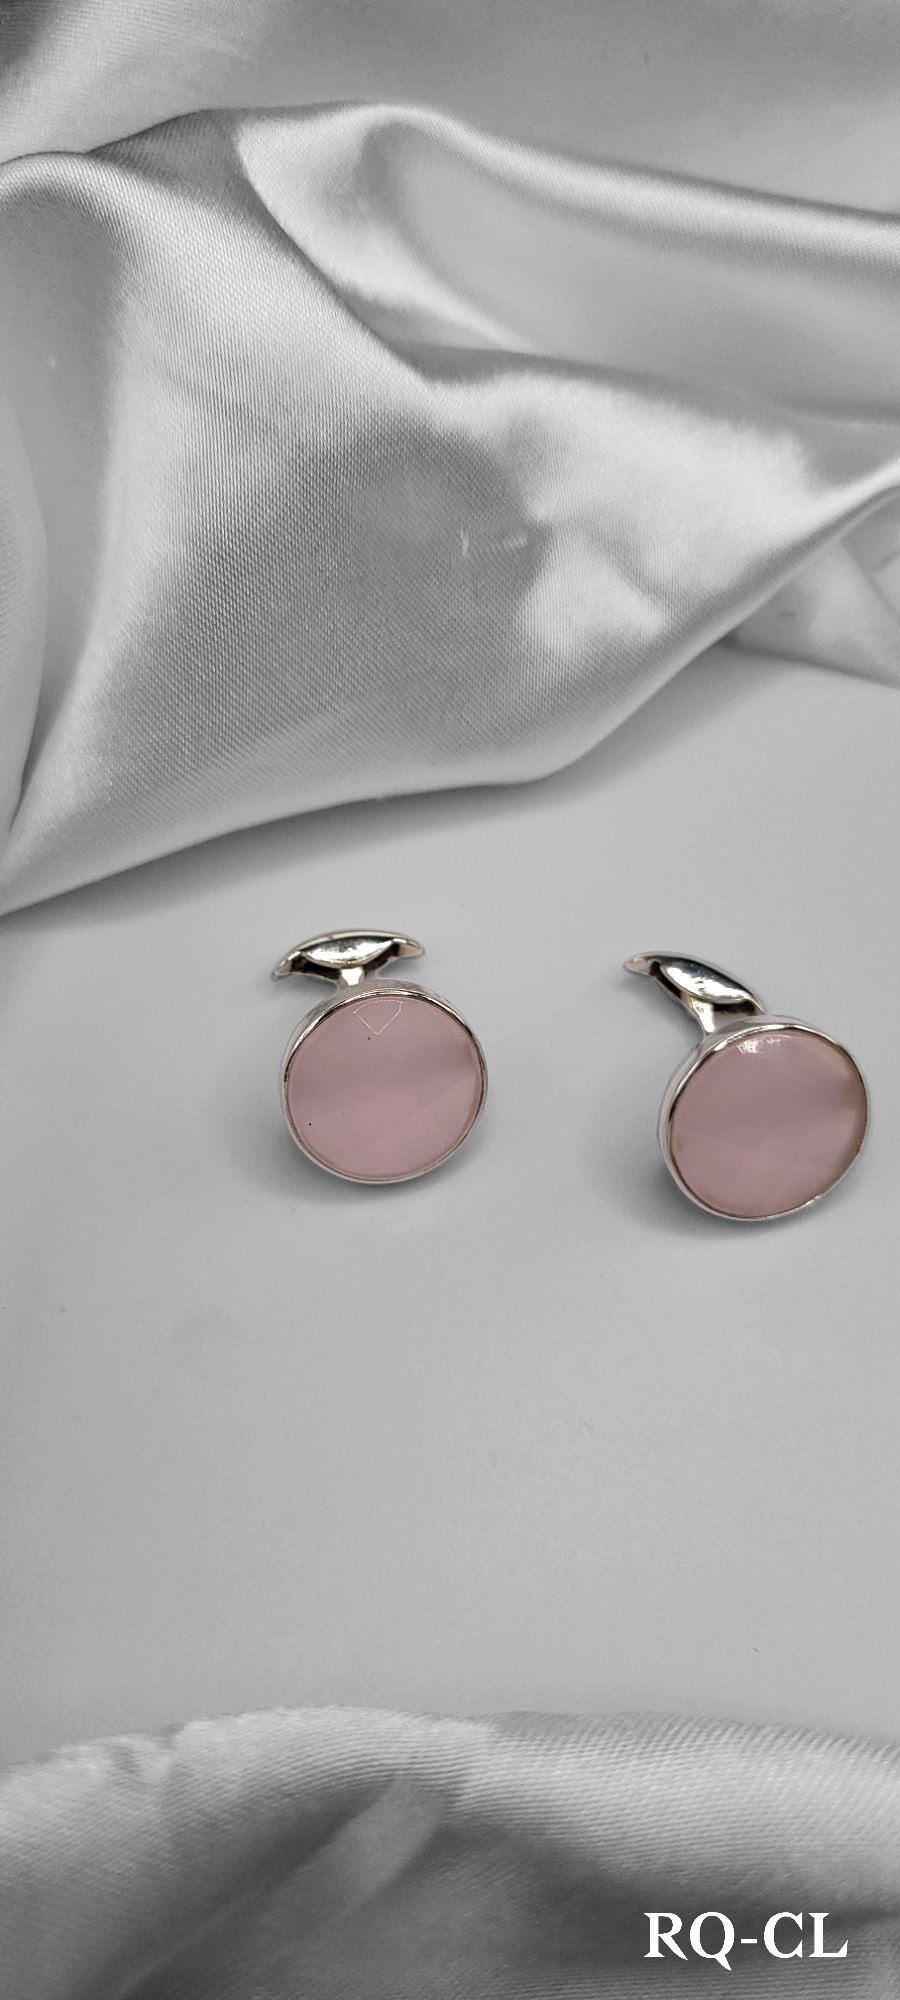 ROSE QUARTZ CUFF LINKS ON STERLING SILVER. BEST KNOWN AS THE CRYSTAL OF UNCONDITIONAL LOVE!